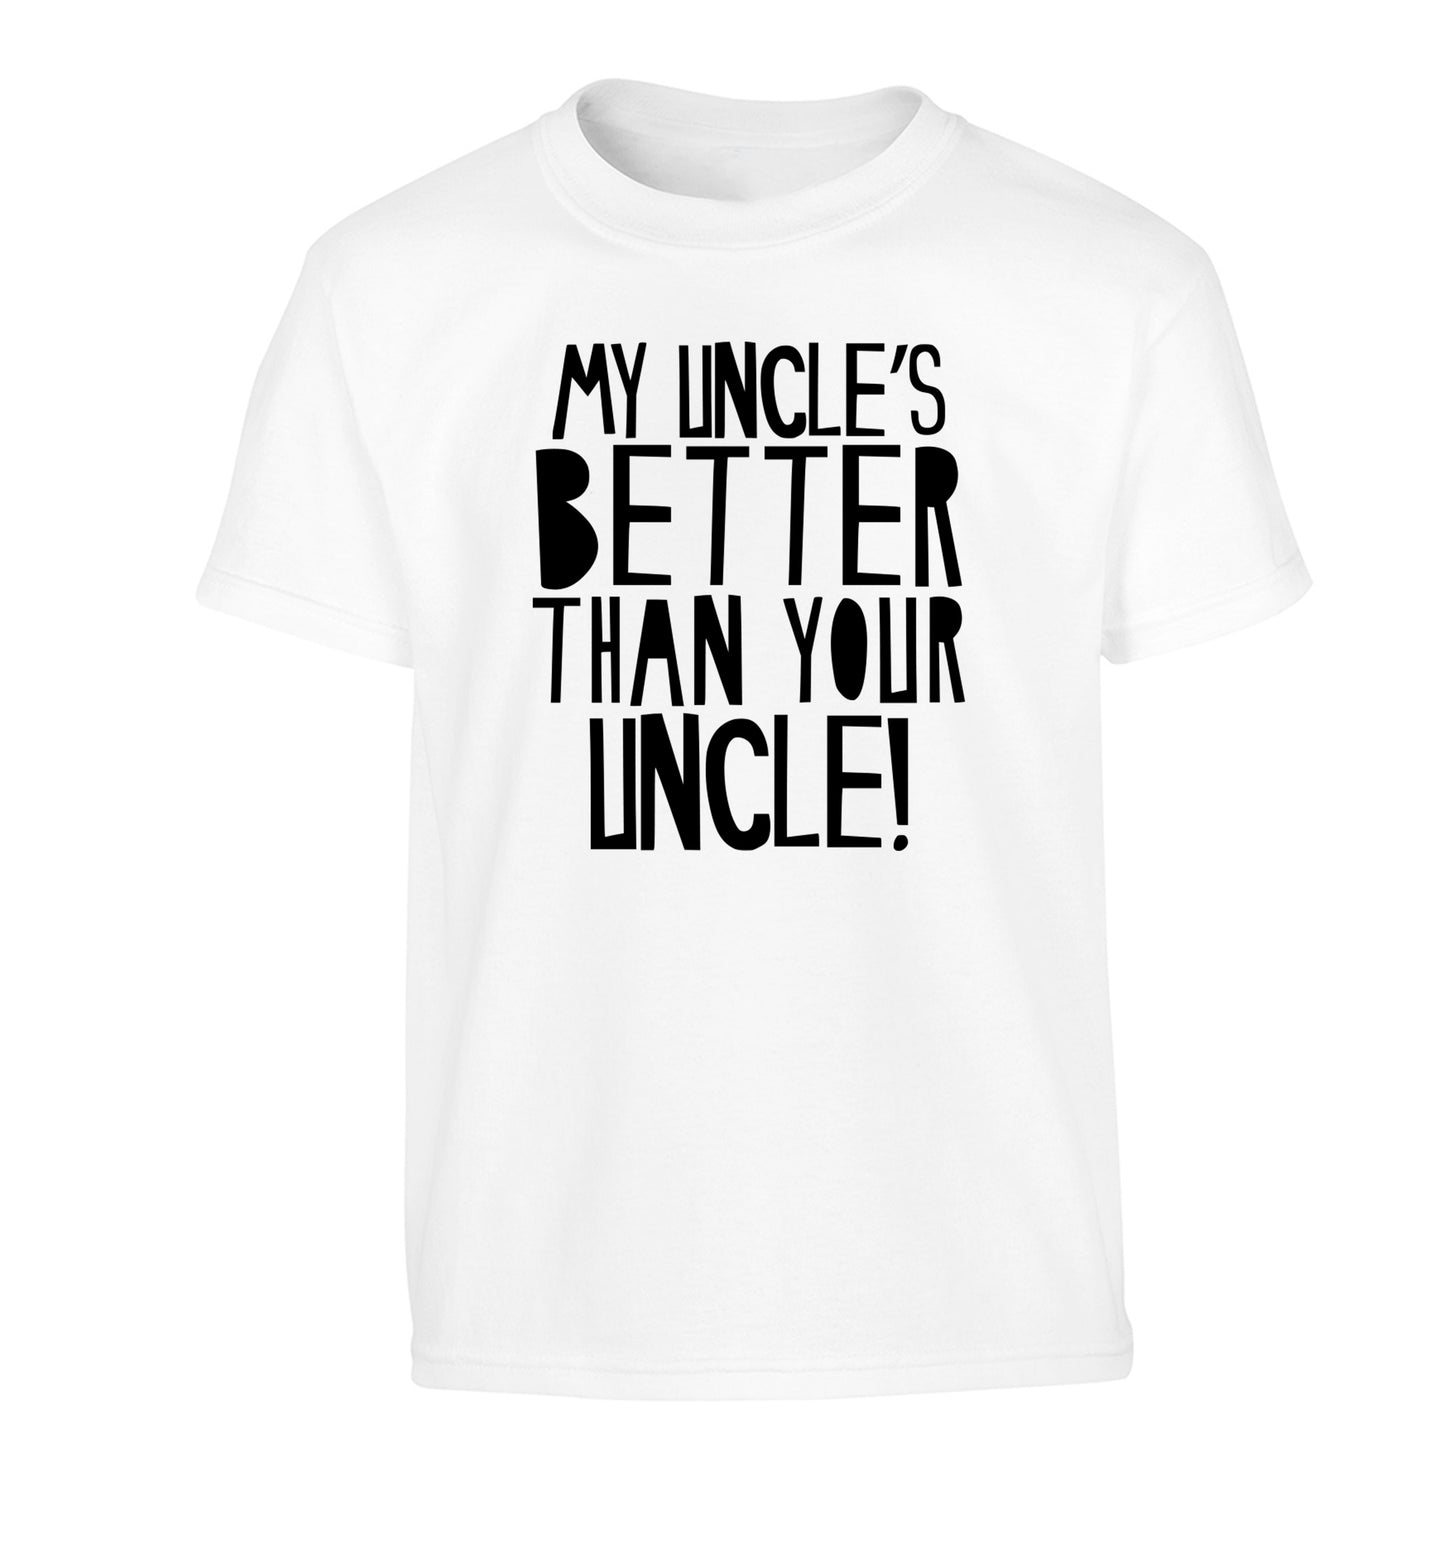 My uncles better than your uncle Children's white Tshirt 12-13 Years